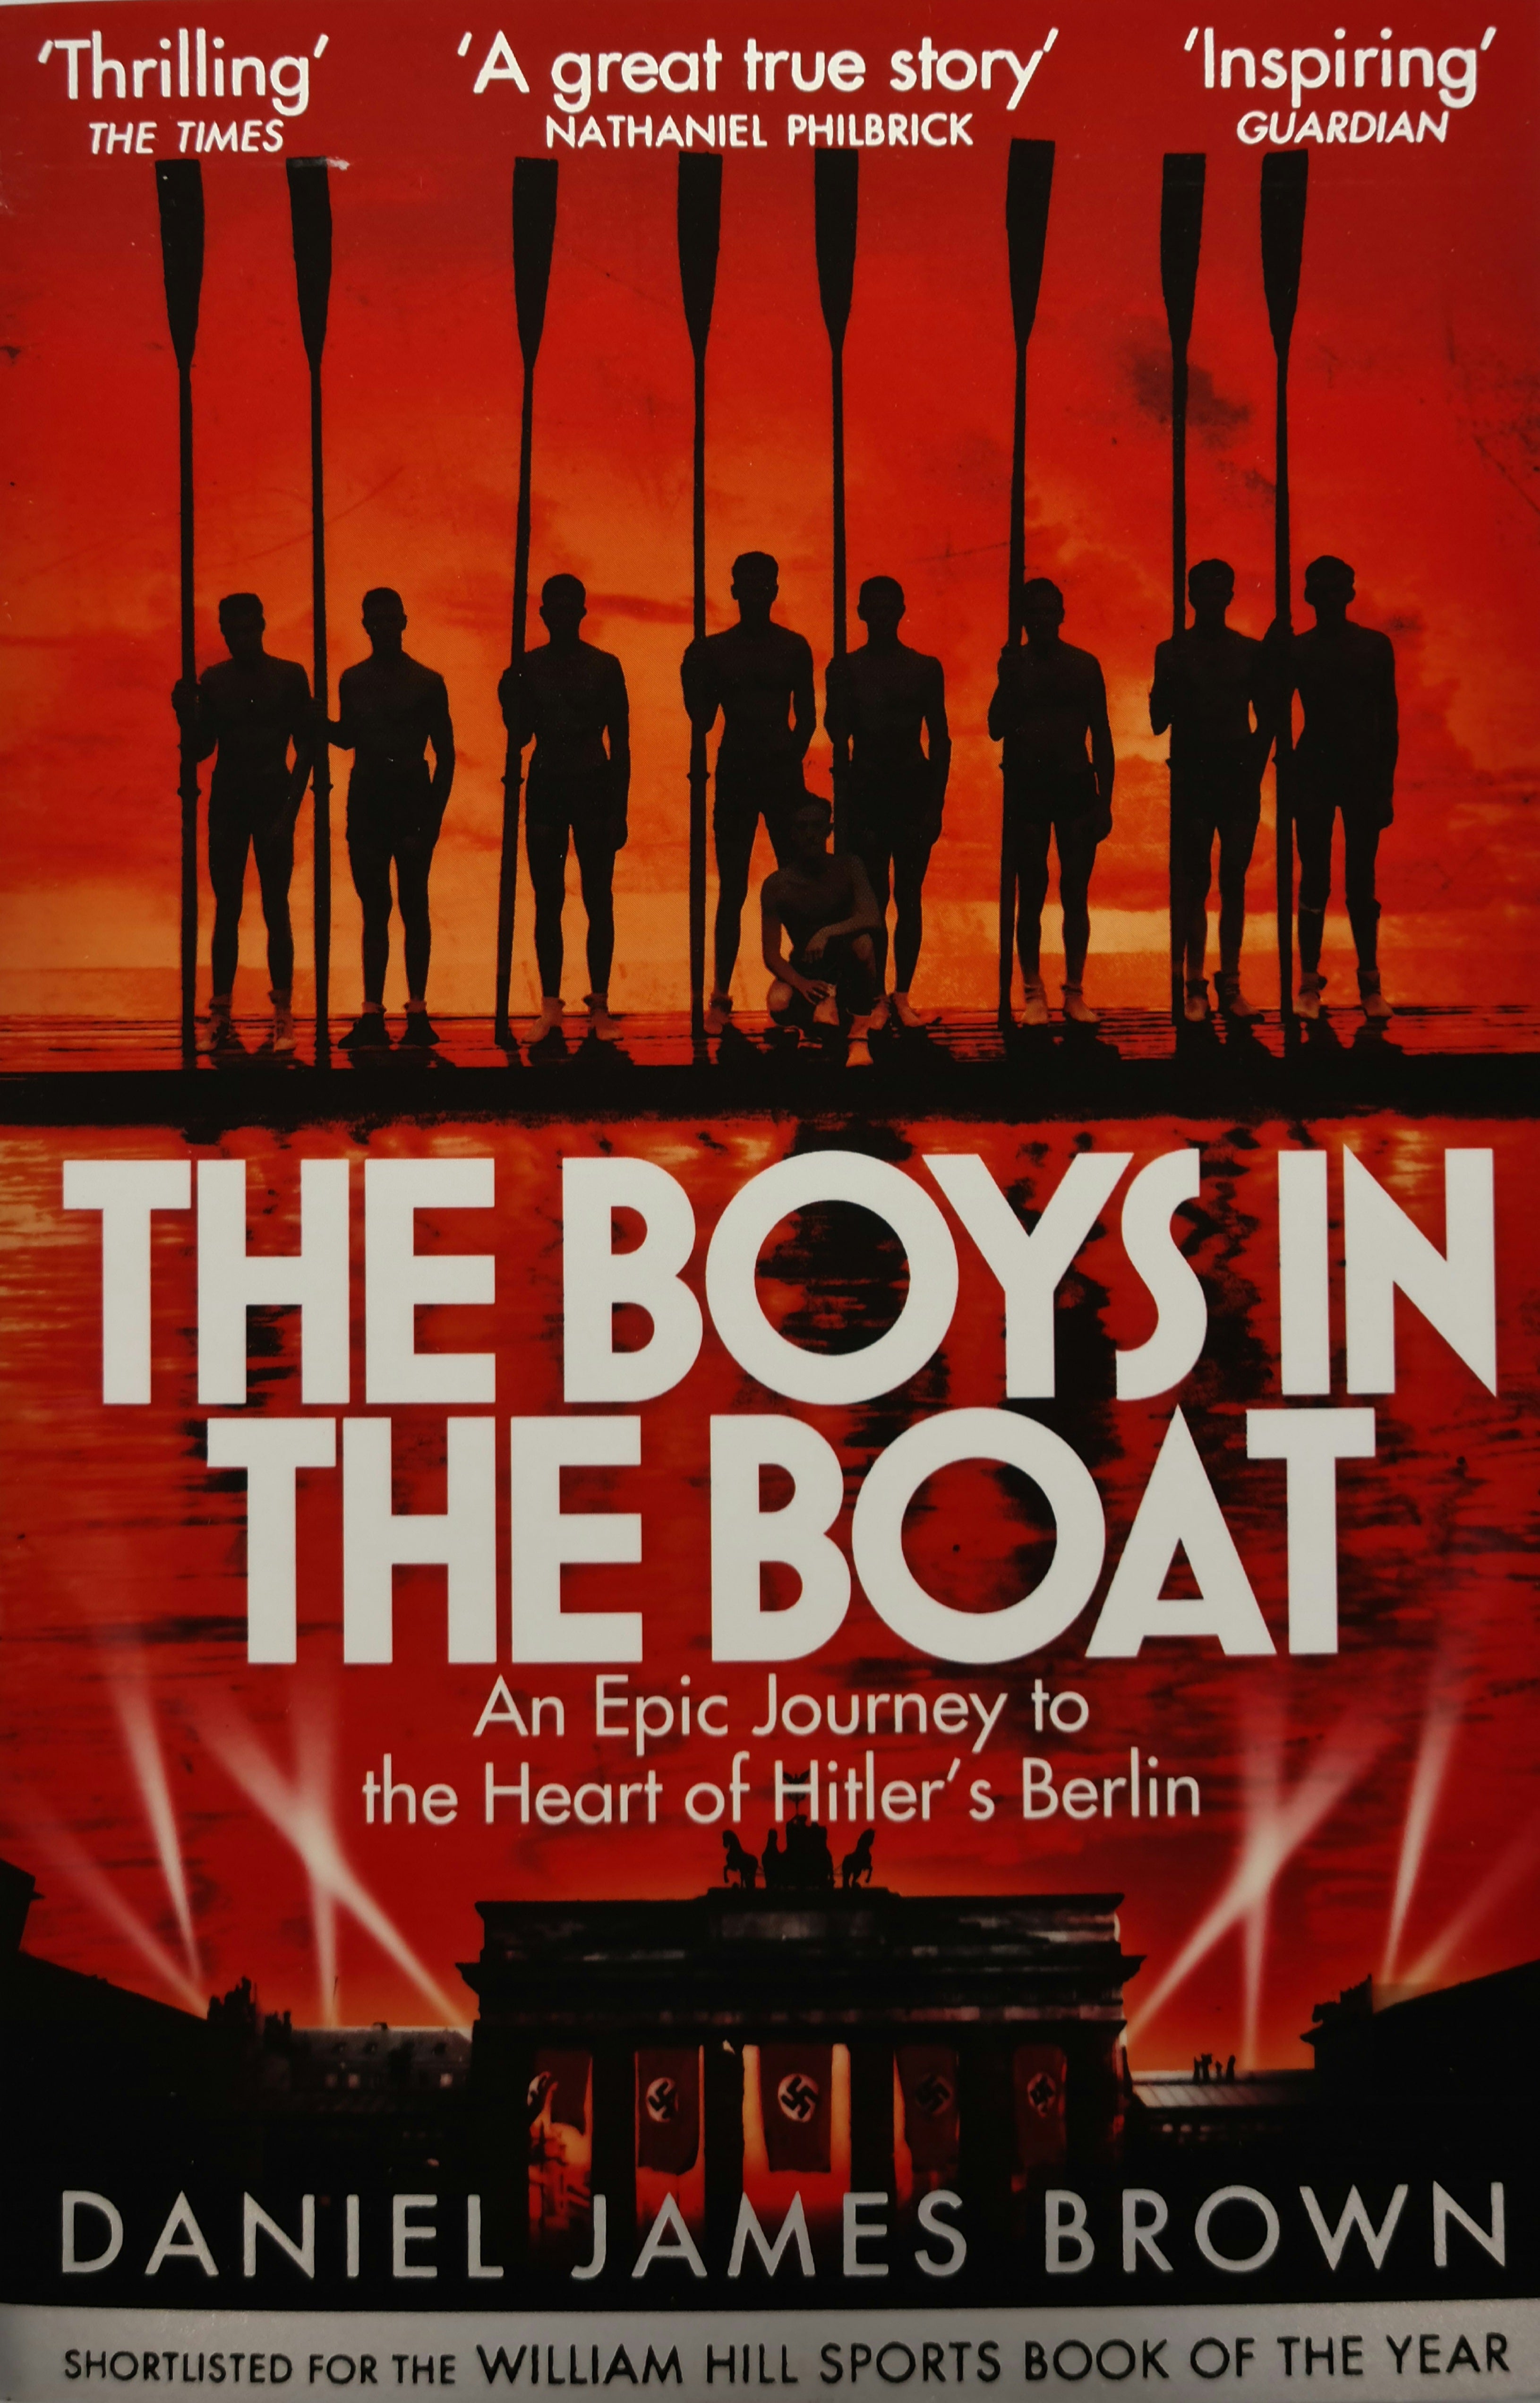 The Boys in The Boat by Daniel James Brown non fictin olympics Berlin rowing booxies